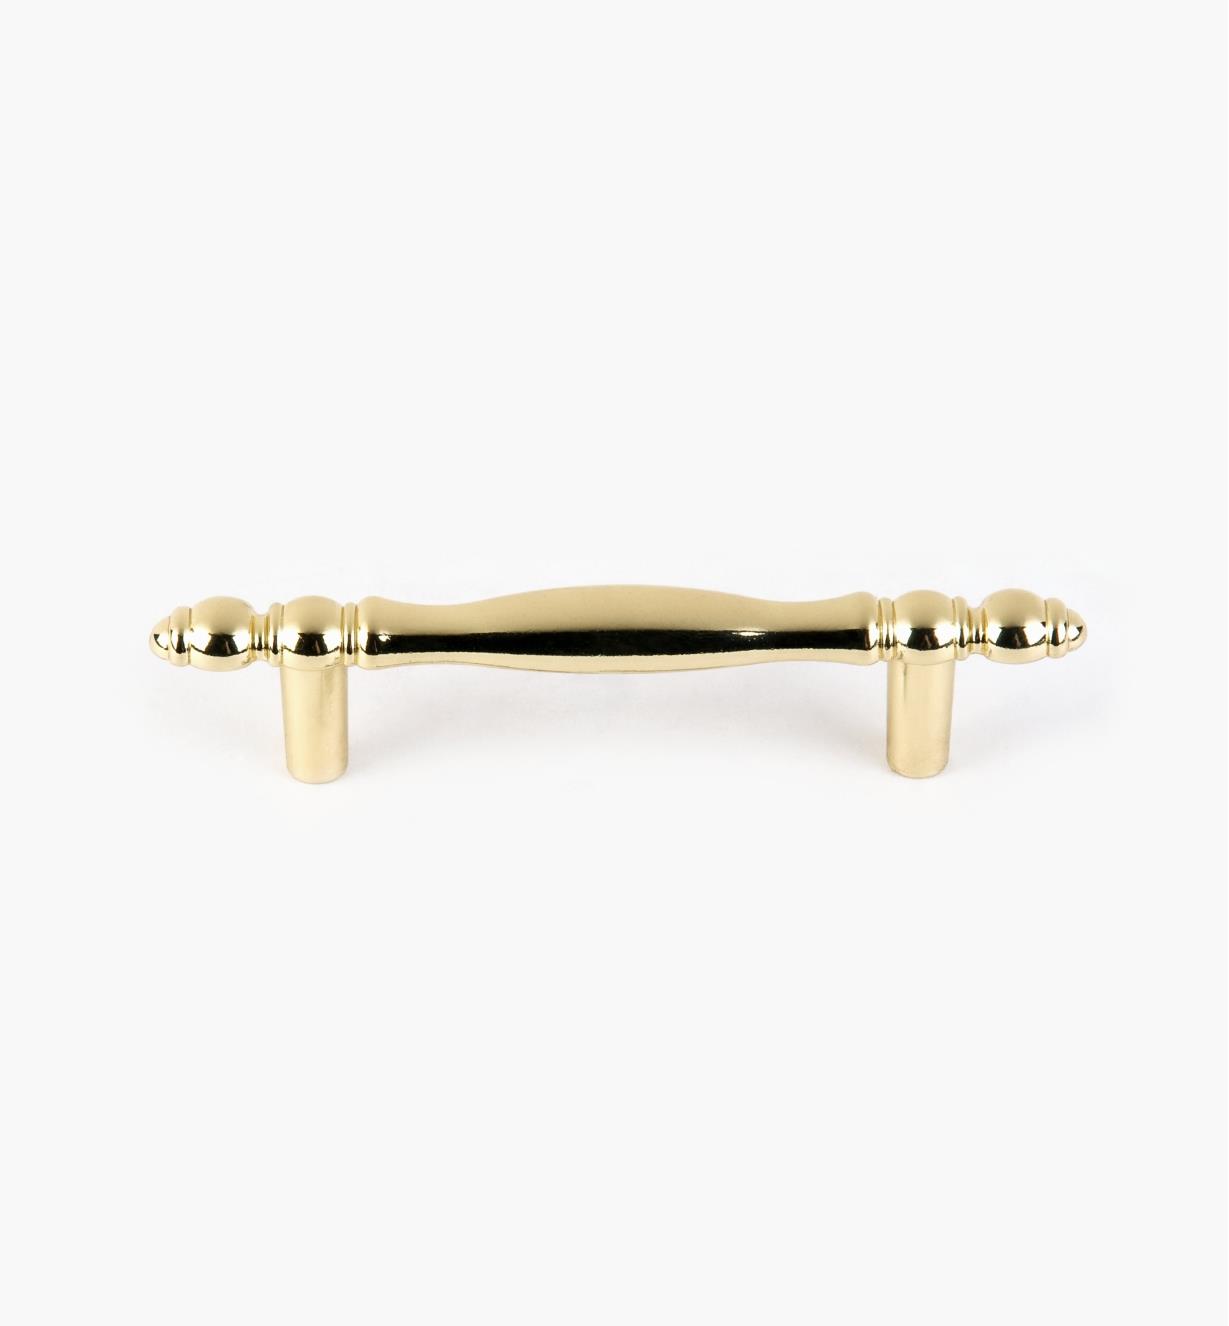 03W2363 - 4 1/4" x 1/2" Ultra-Bright Brass Finish Polished Accent Pull, each